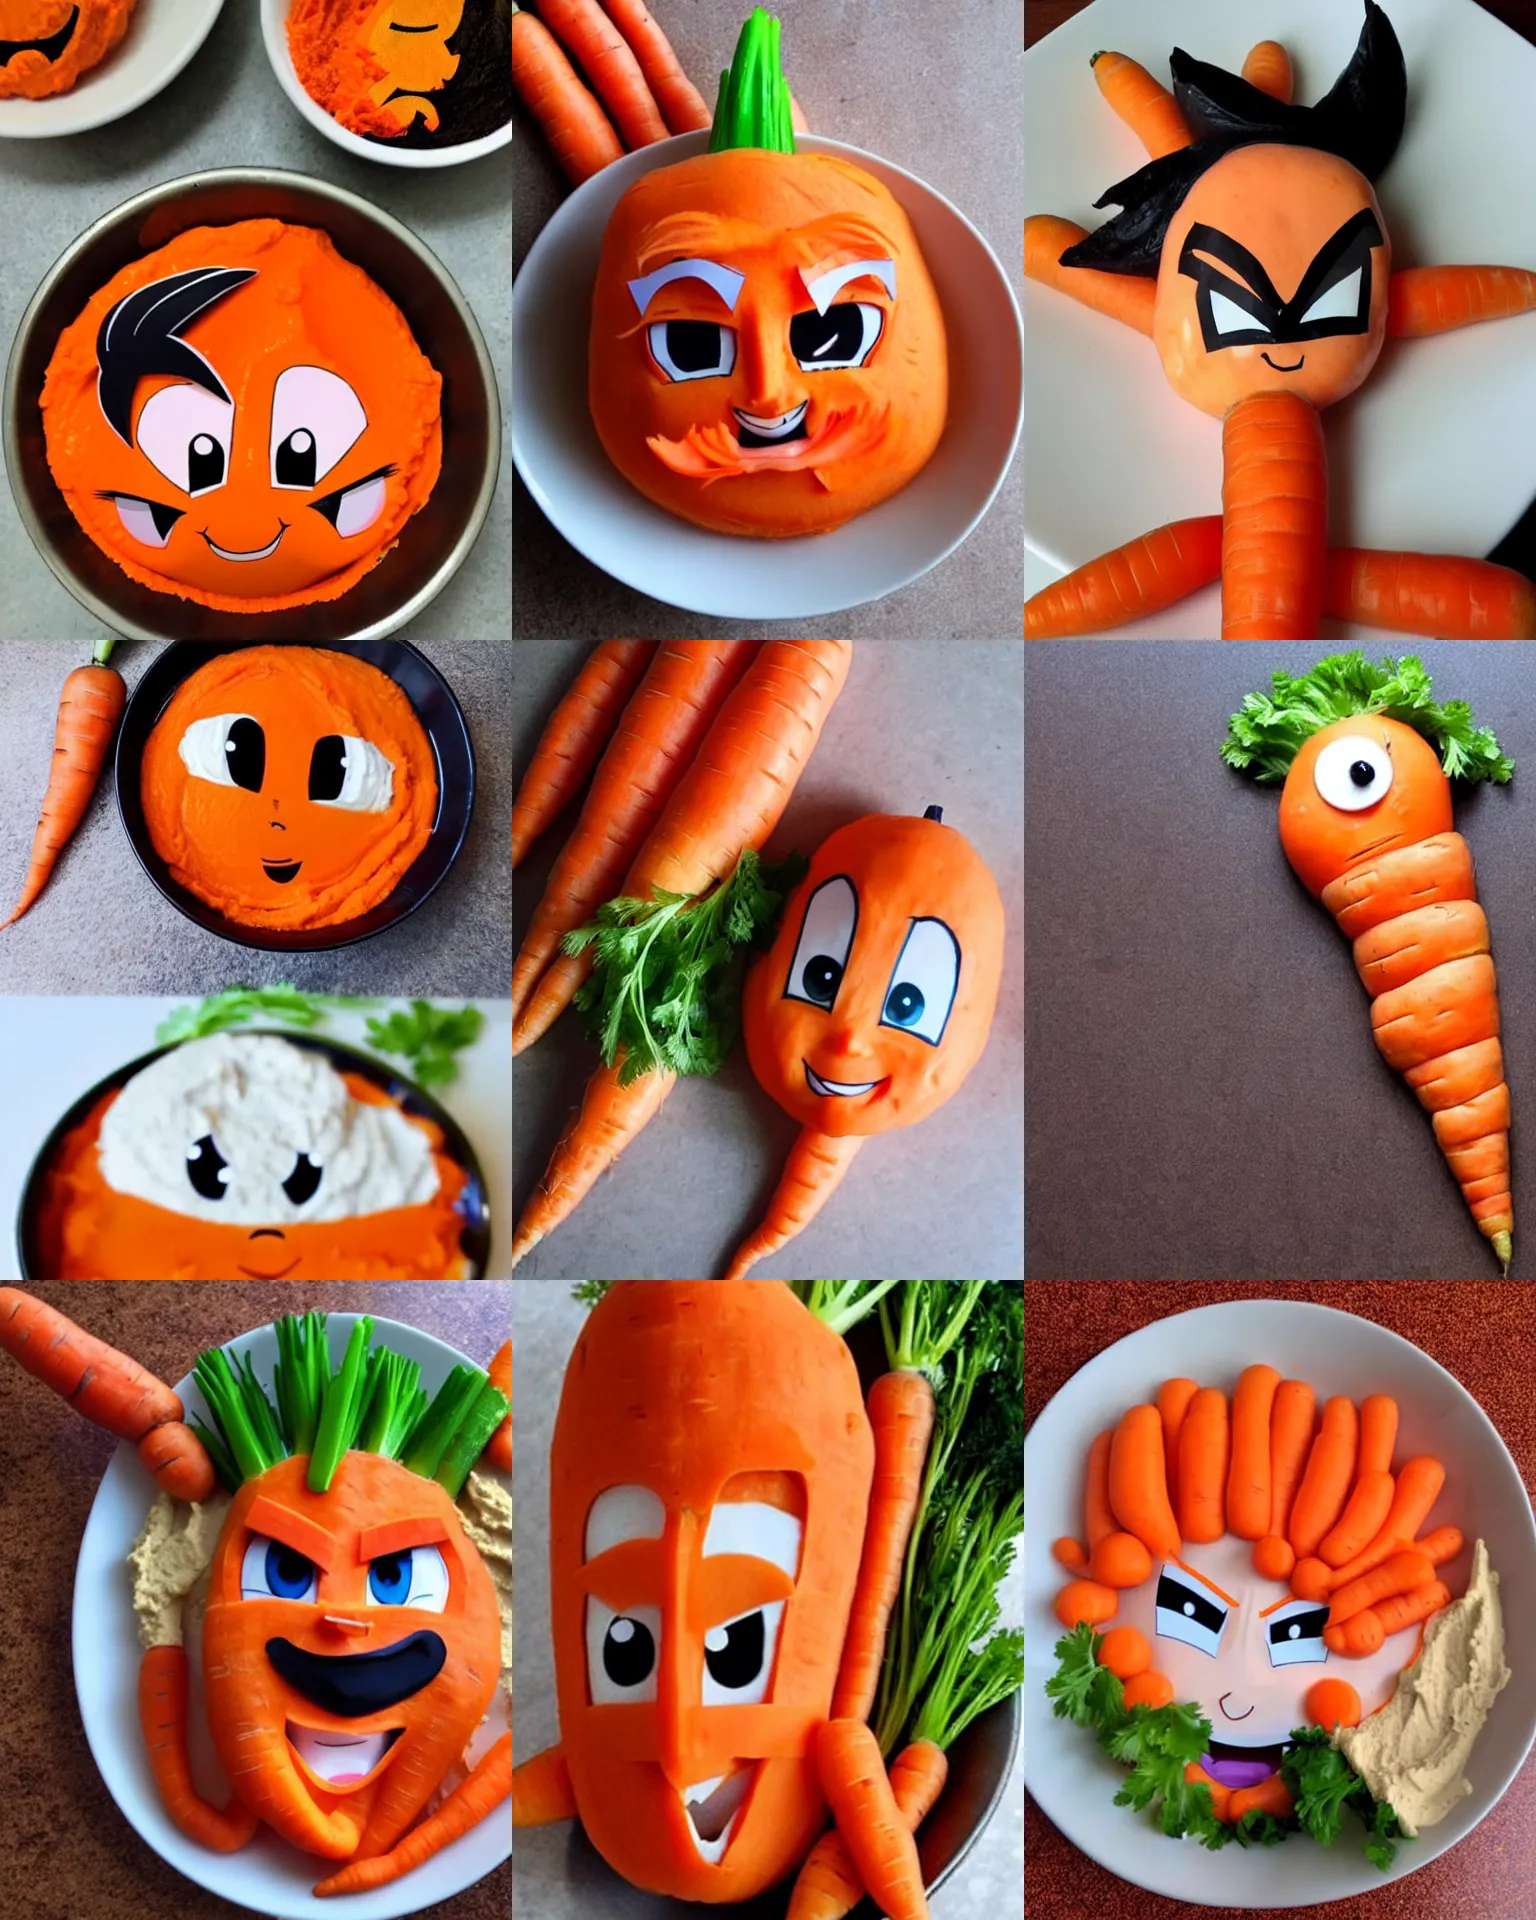 Prompt: a photo of a carrot, carrot vegetable fusion with goku from dragon ball's face on the carrot, dipping carrot in hummus